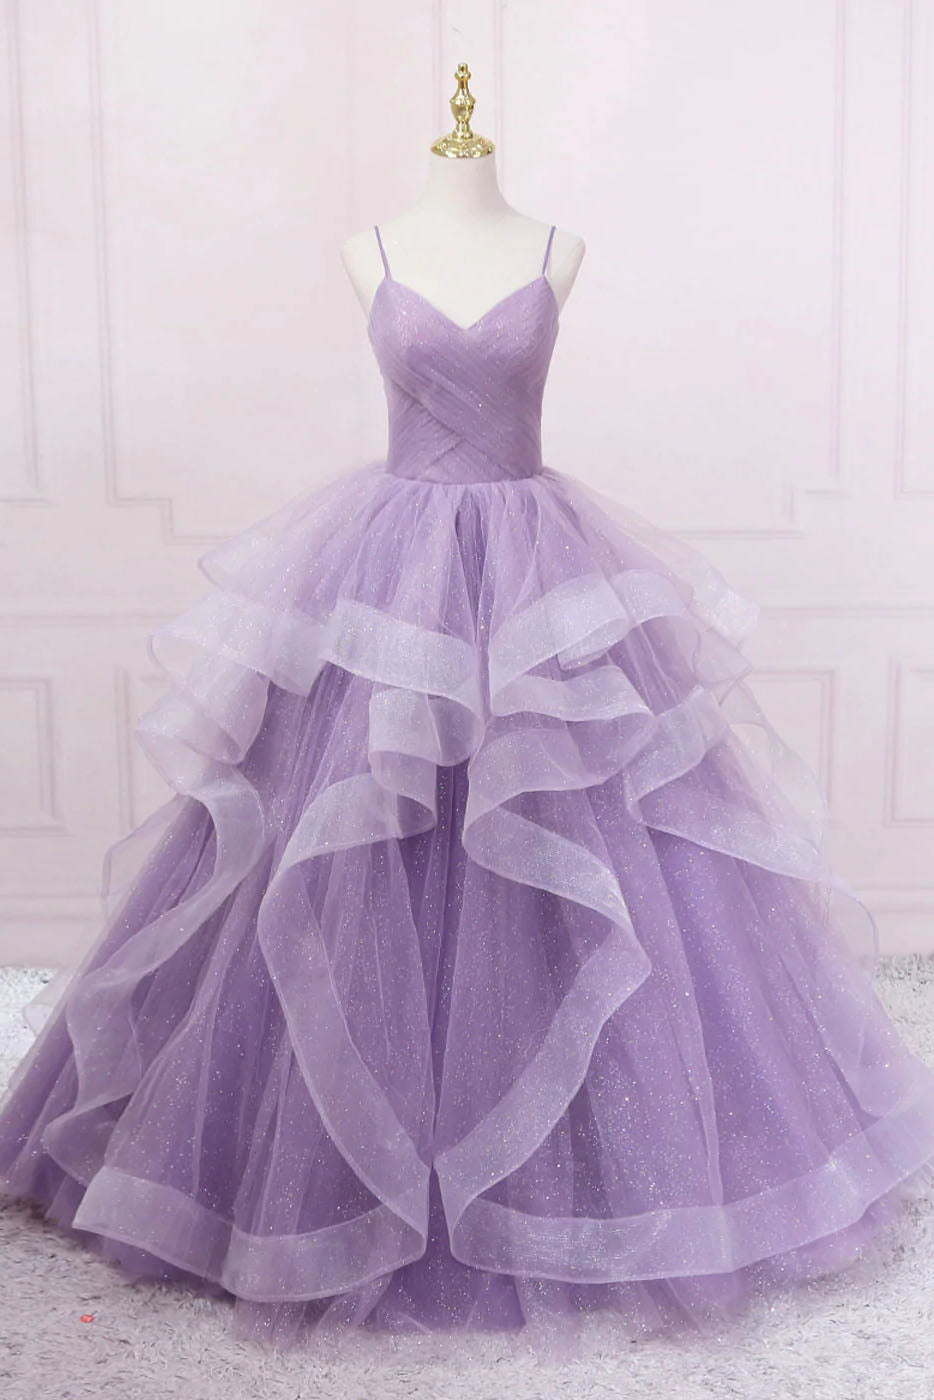 Princess Lavender Sparkly Spaghetti Straps Long Corset Prom Dress Floor Length Evening Gown outfits, Party Dress Afternoon Tea